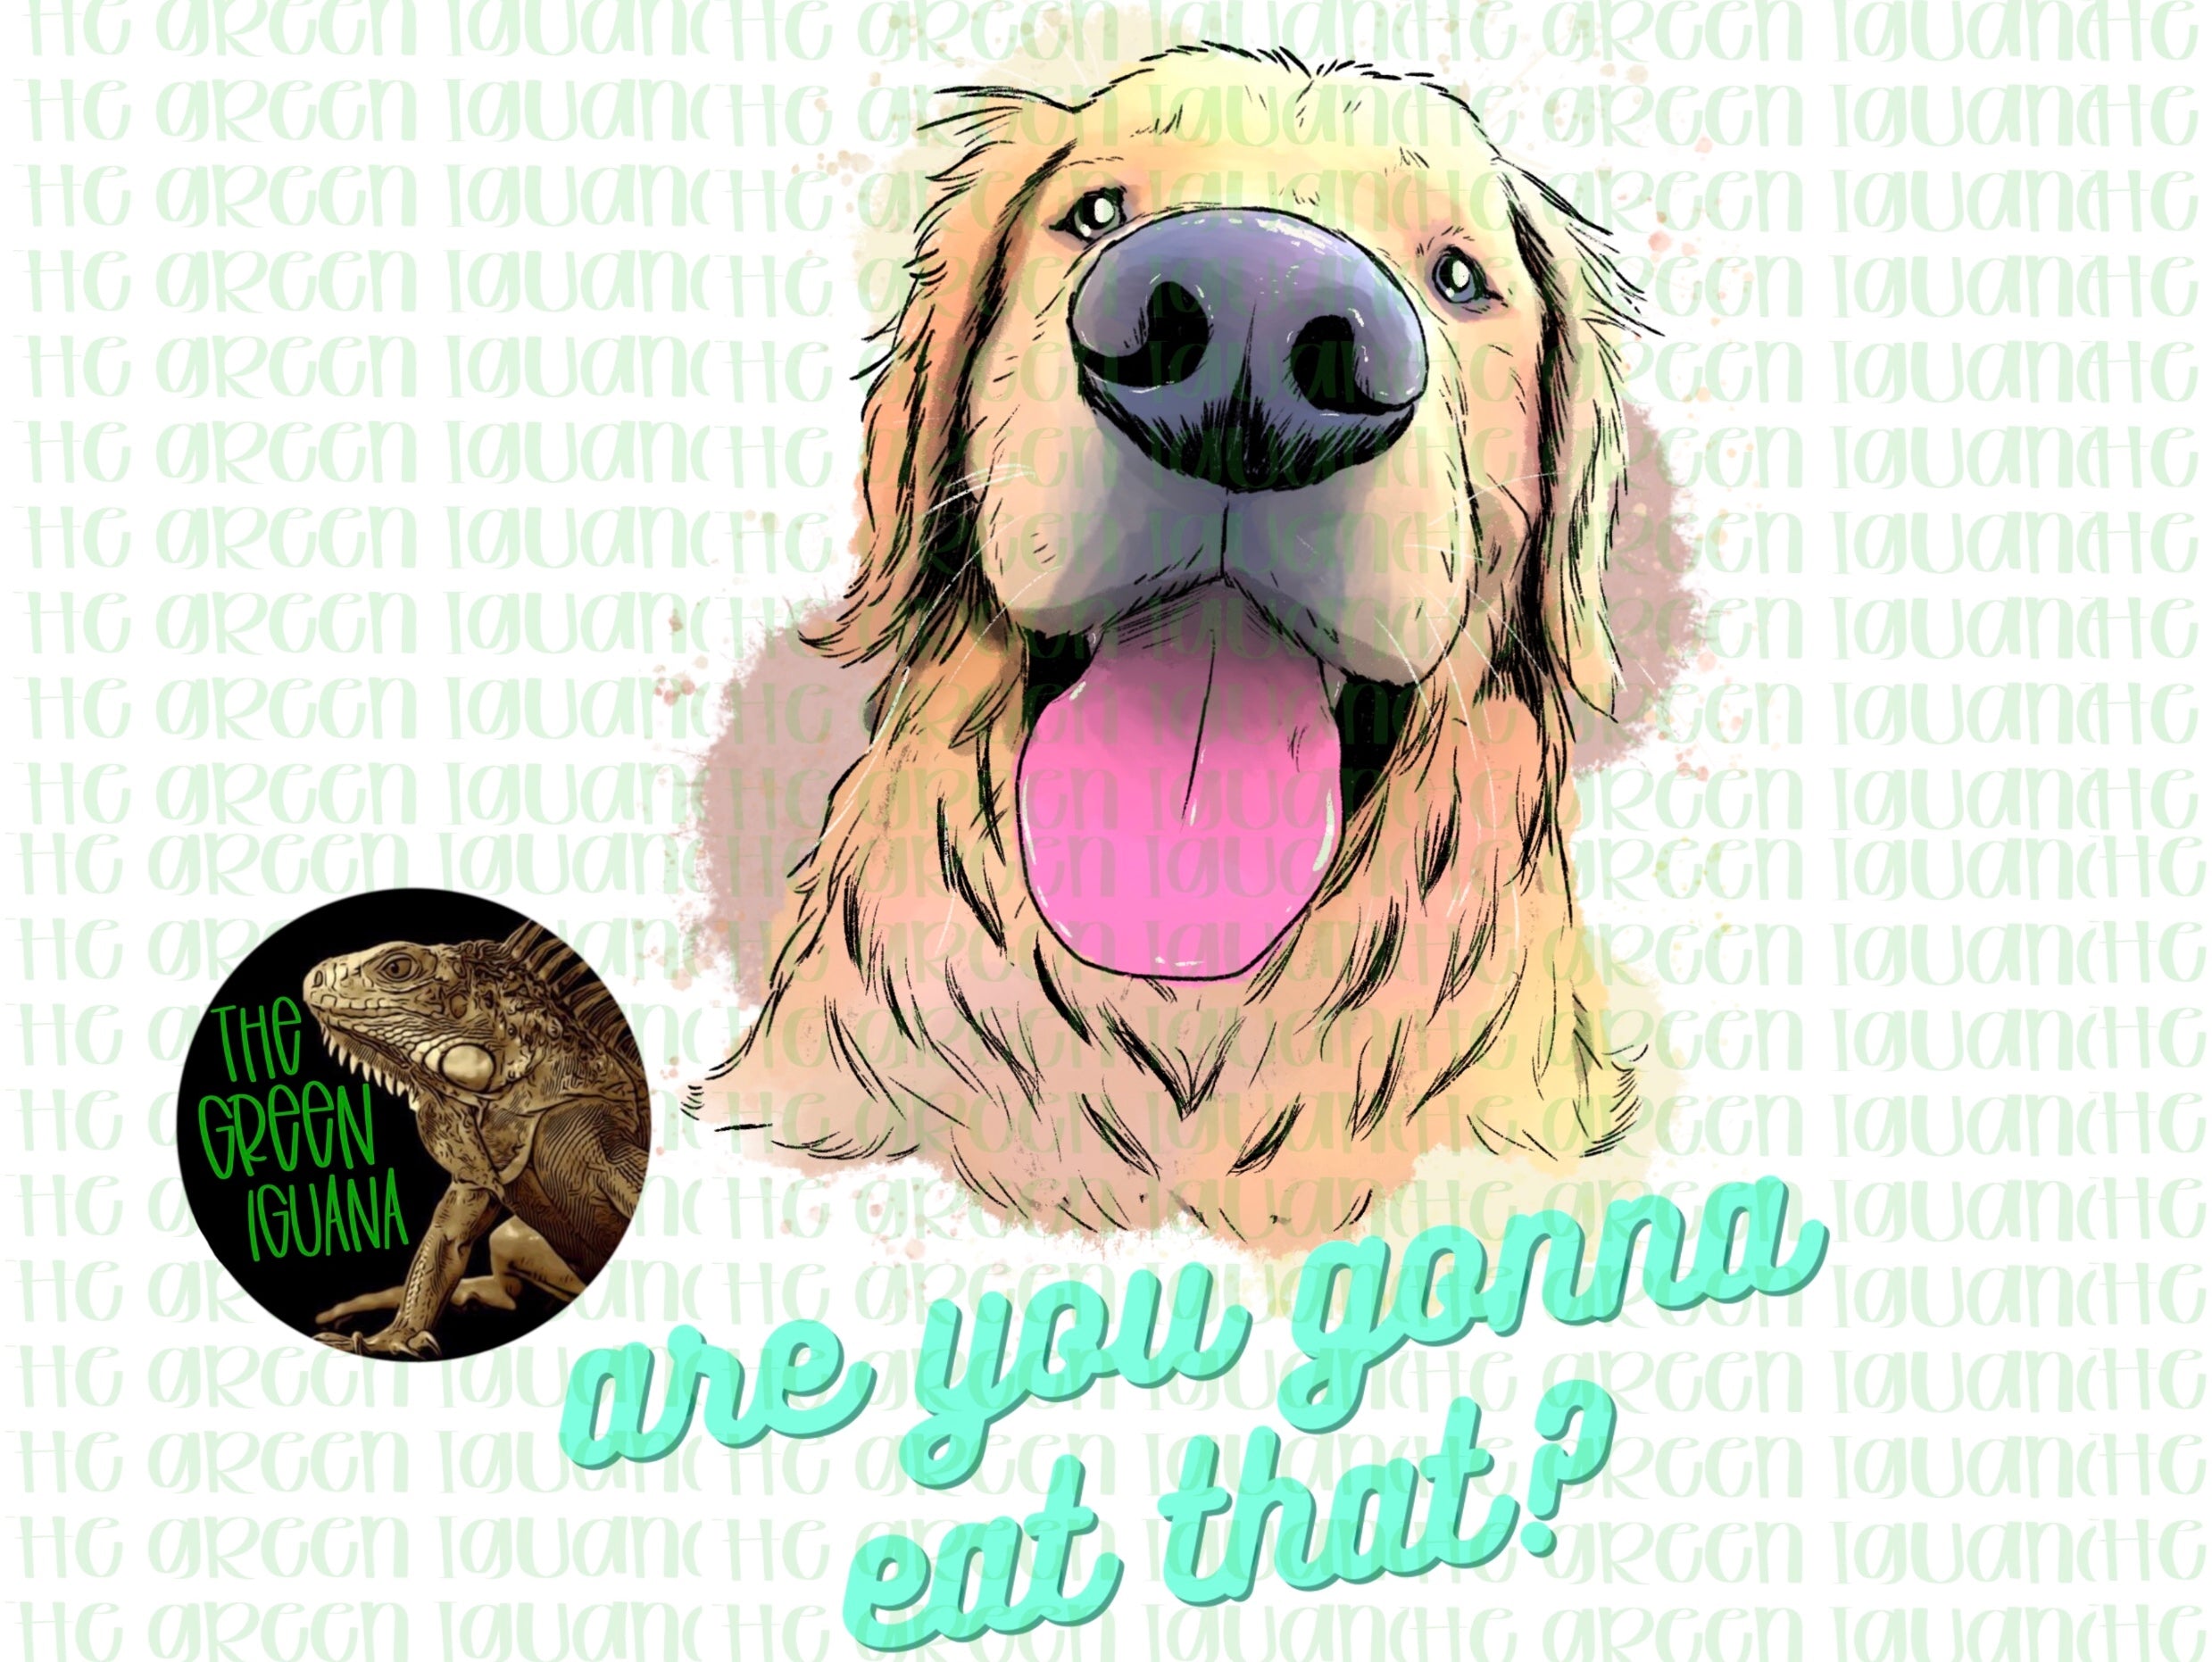 Are you gonna eat that? - DIGITAL